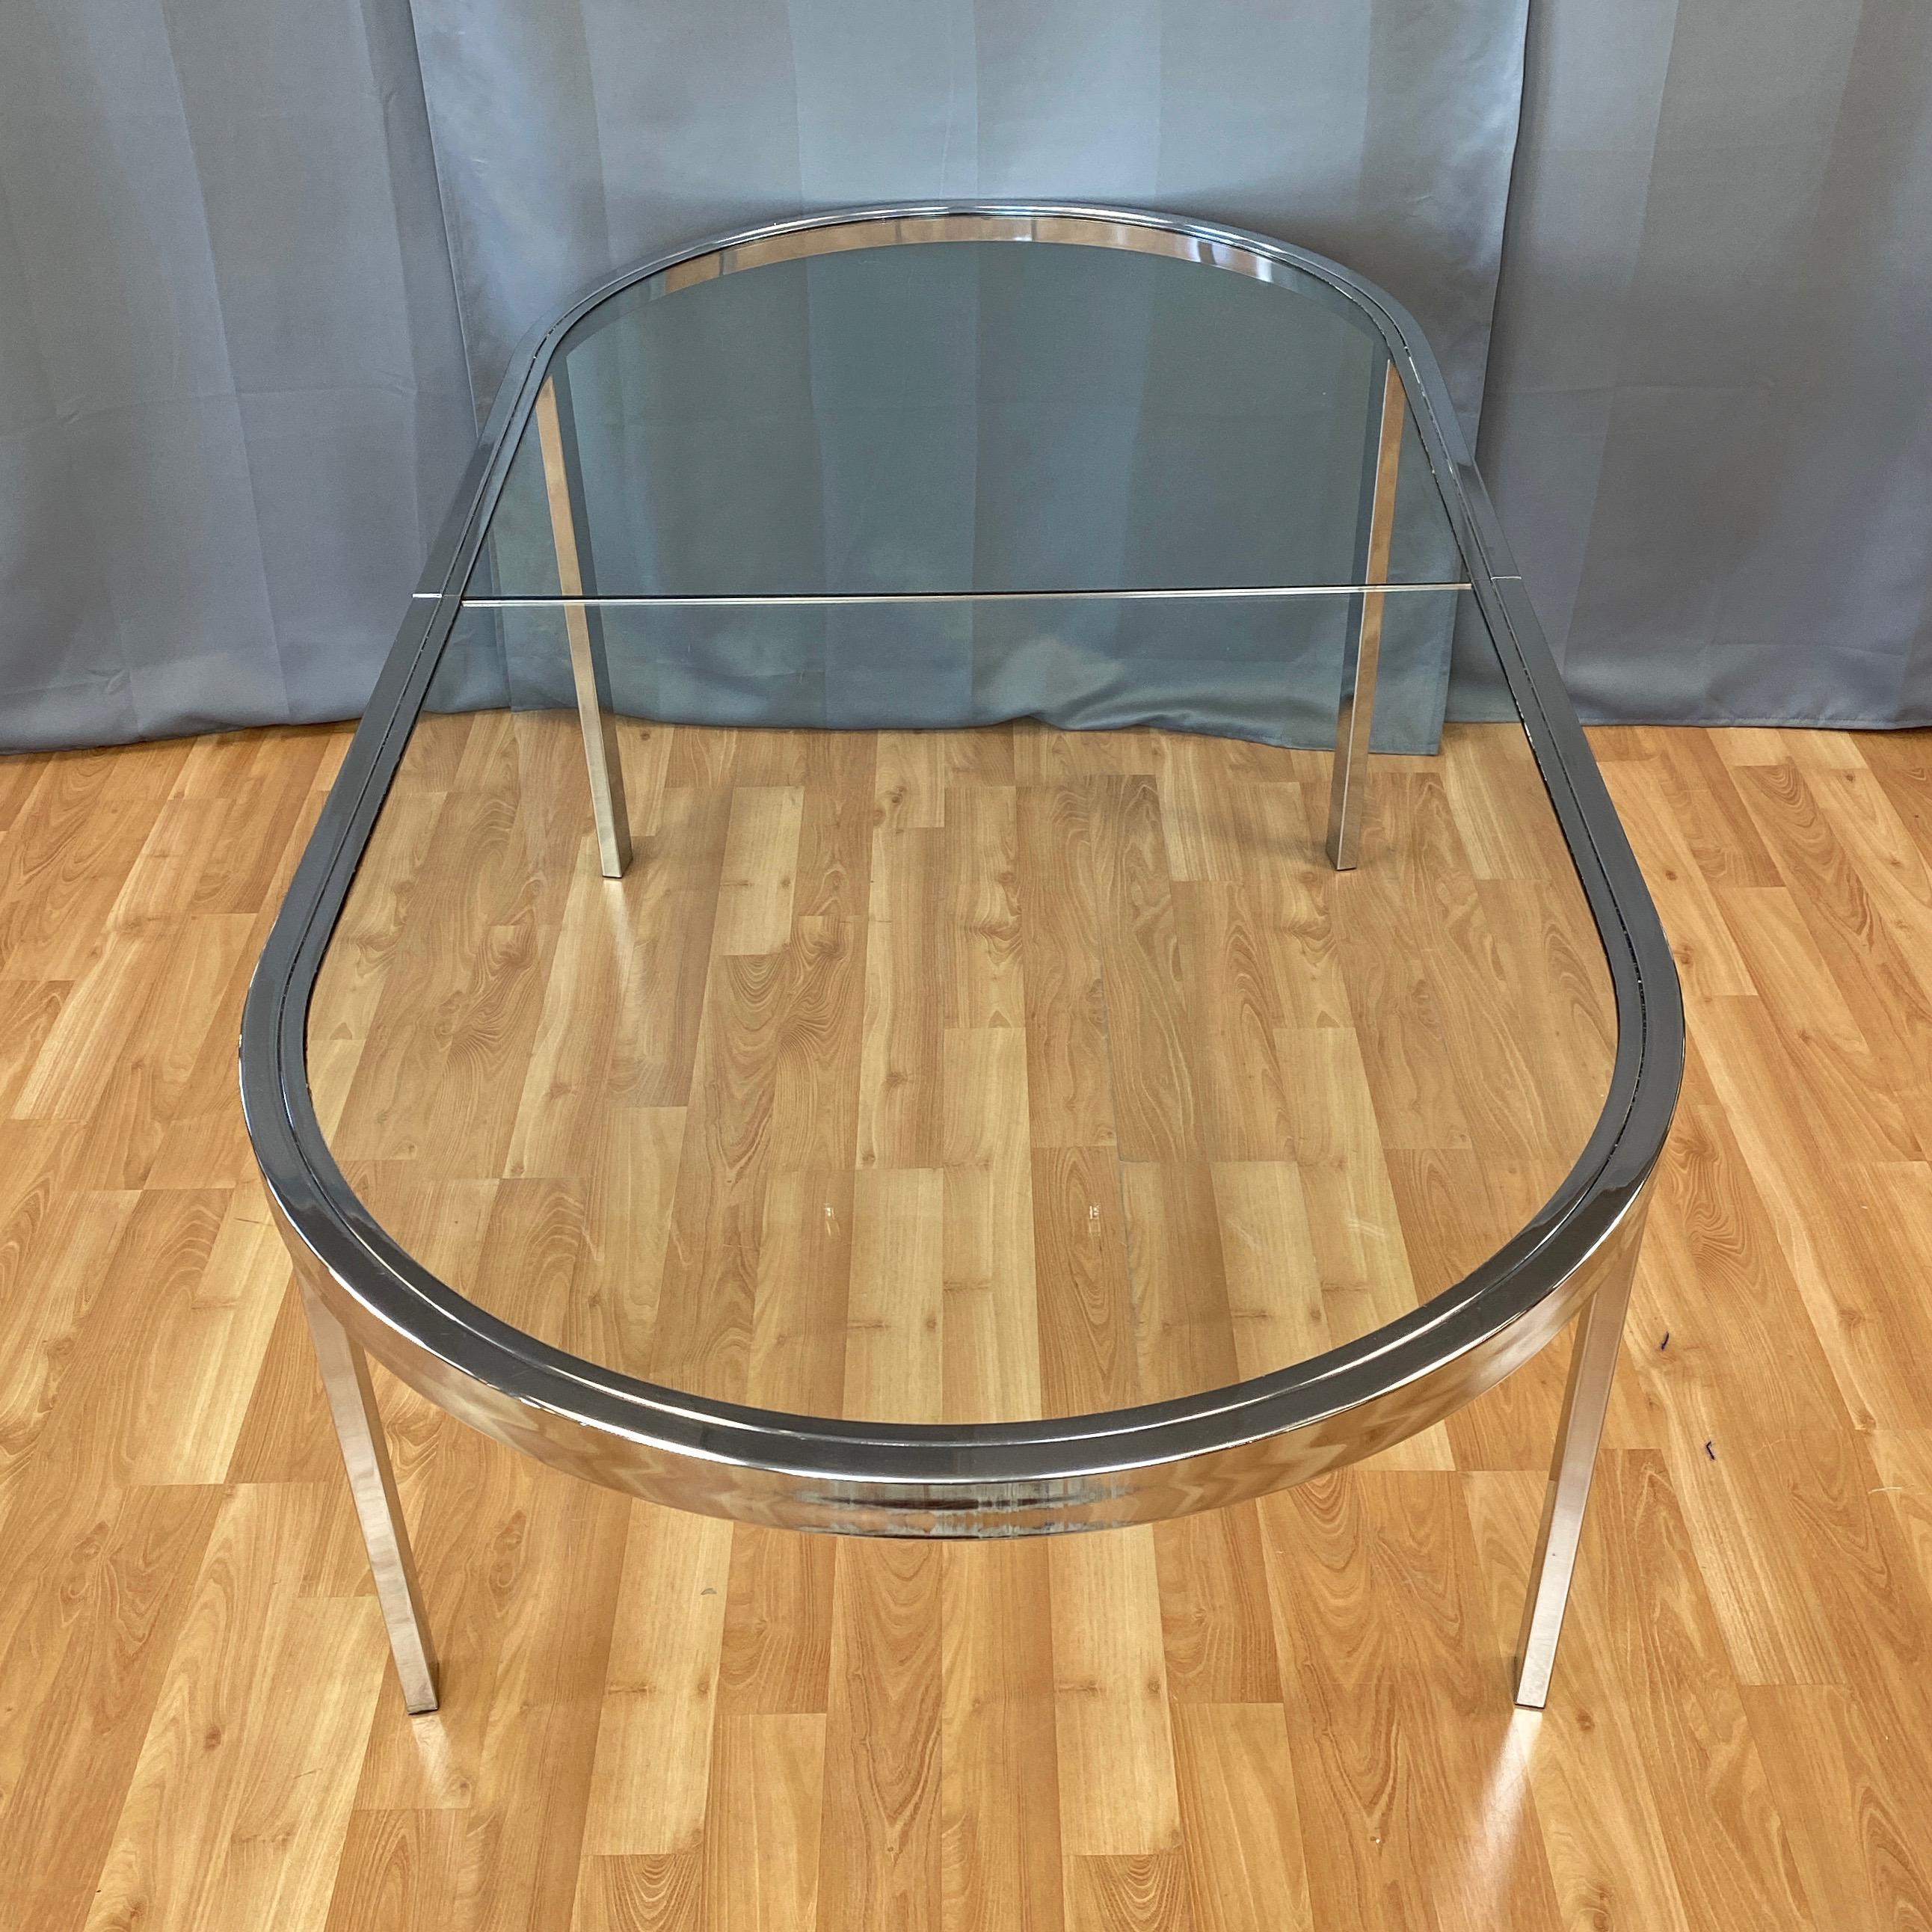 American Milo Baughman Chrome and Glass Racetrack Dining Table, 1970s